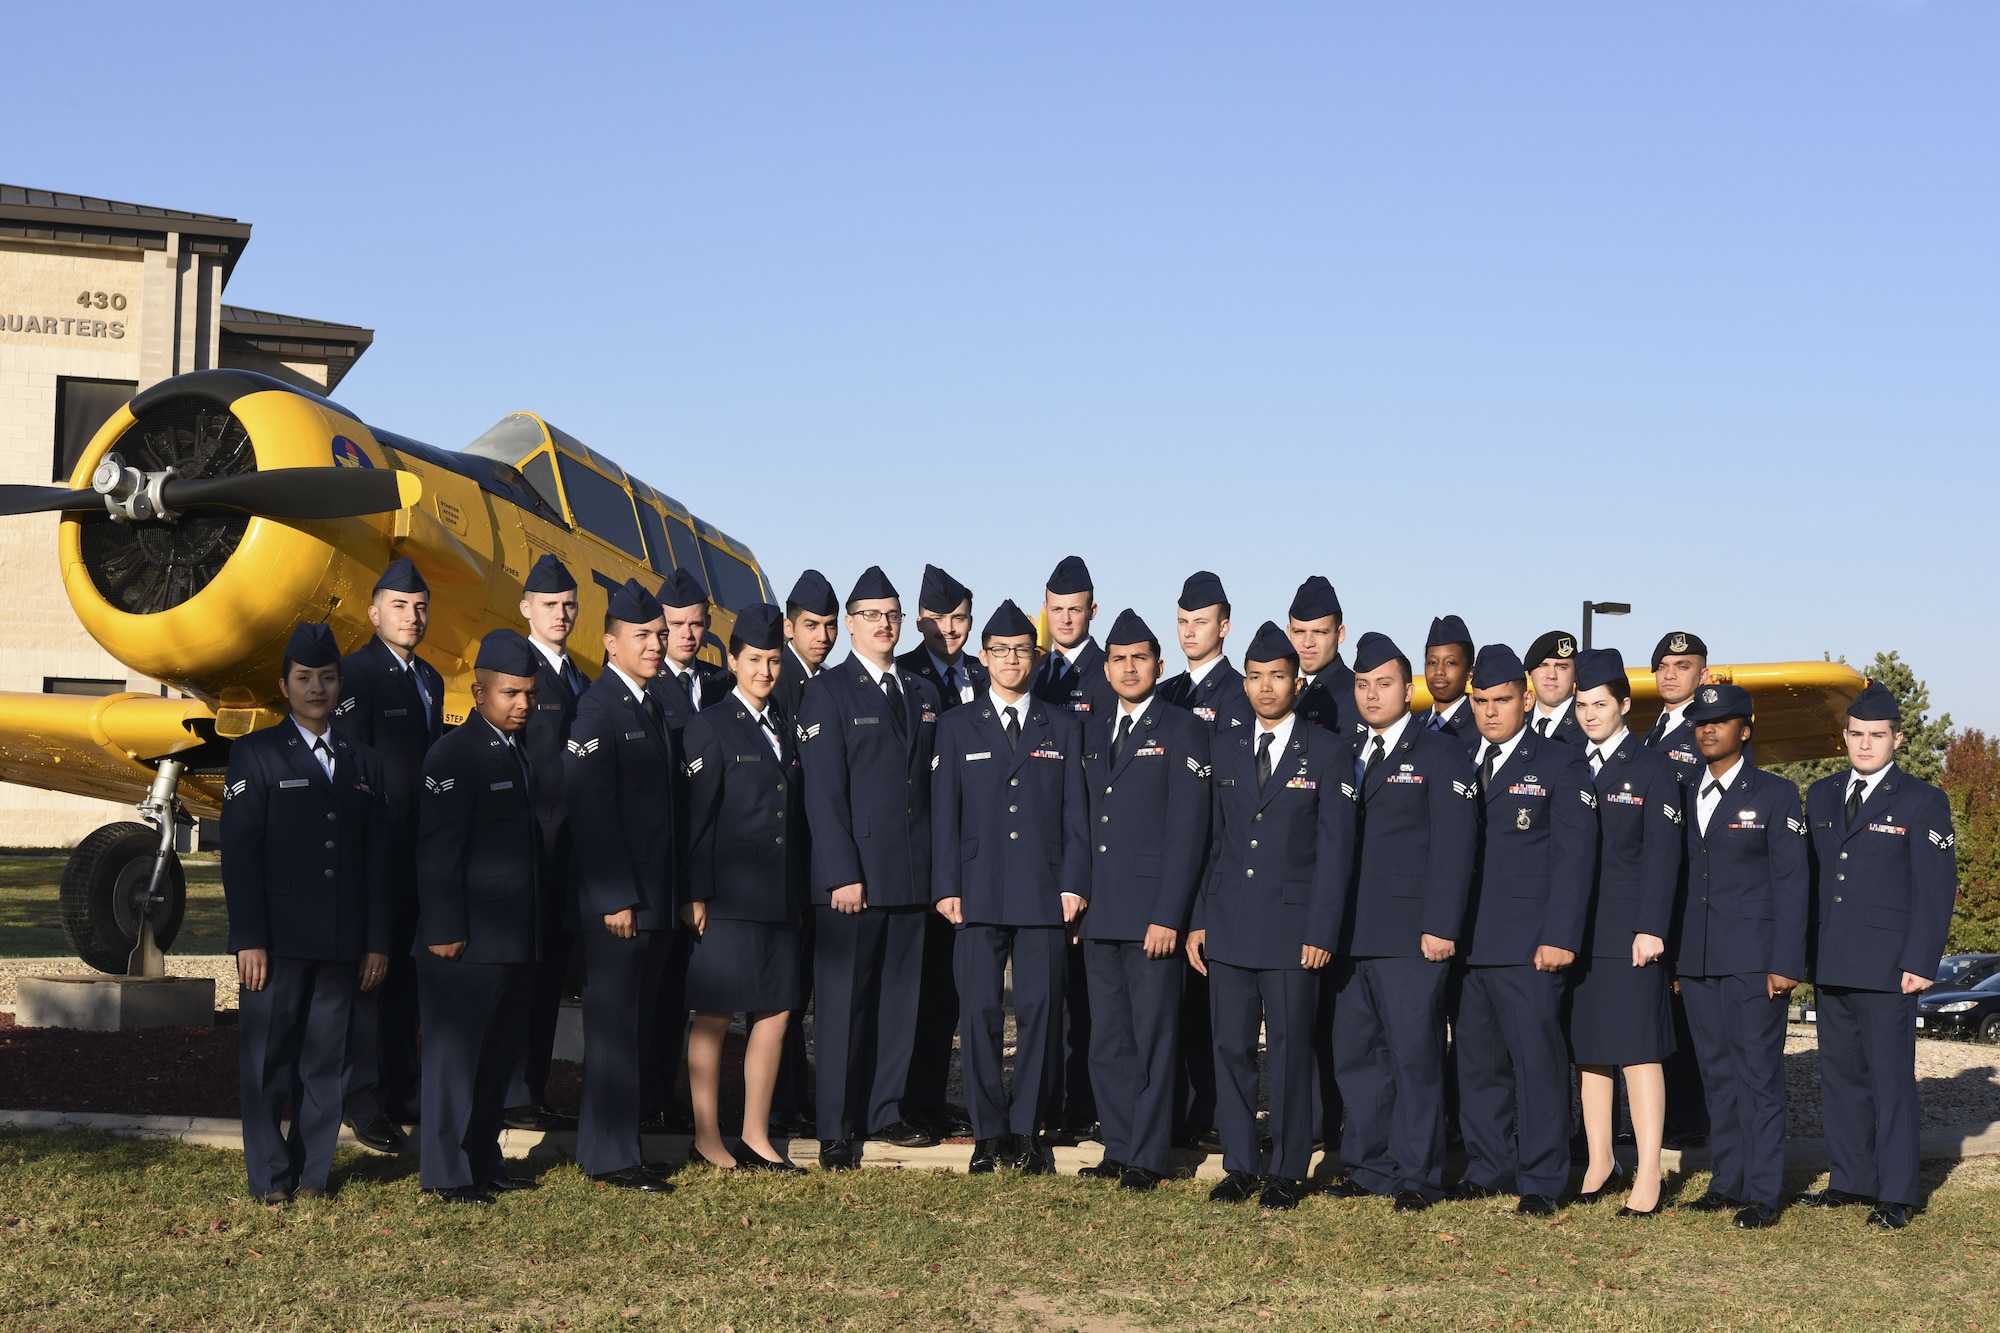 Airman Leadership School Class 18-A stands before the T-6 Texan static plane display on Goodfellow Air Force Base, Texas, Nov. 27, 2017. ALS is a six-week course designed to prepare senior airmen to assume supervisory duties by offering instruction in leadership, followership, written and oral communication skills, and the profession of arms.